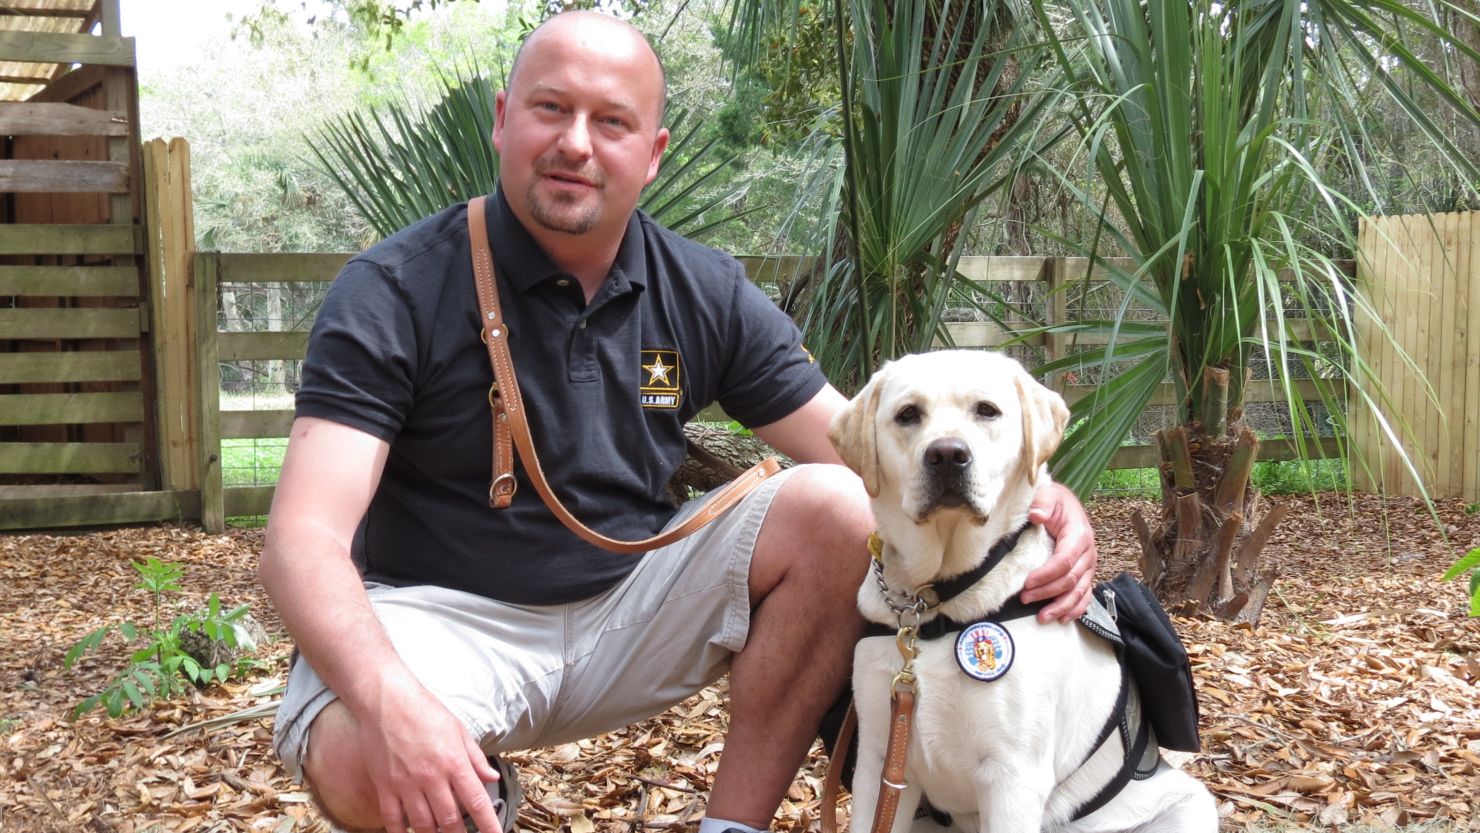 Former Army Spc. Karl Fleming rarely ventured outside before he got Kuchar, a service dog trained to help soldiers.